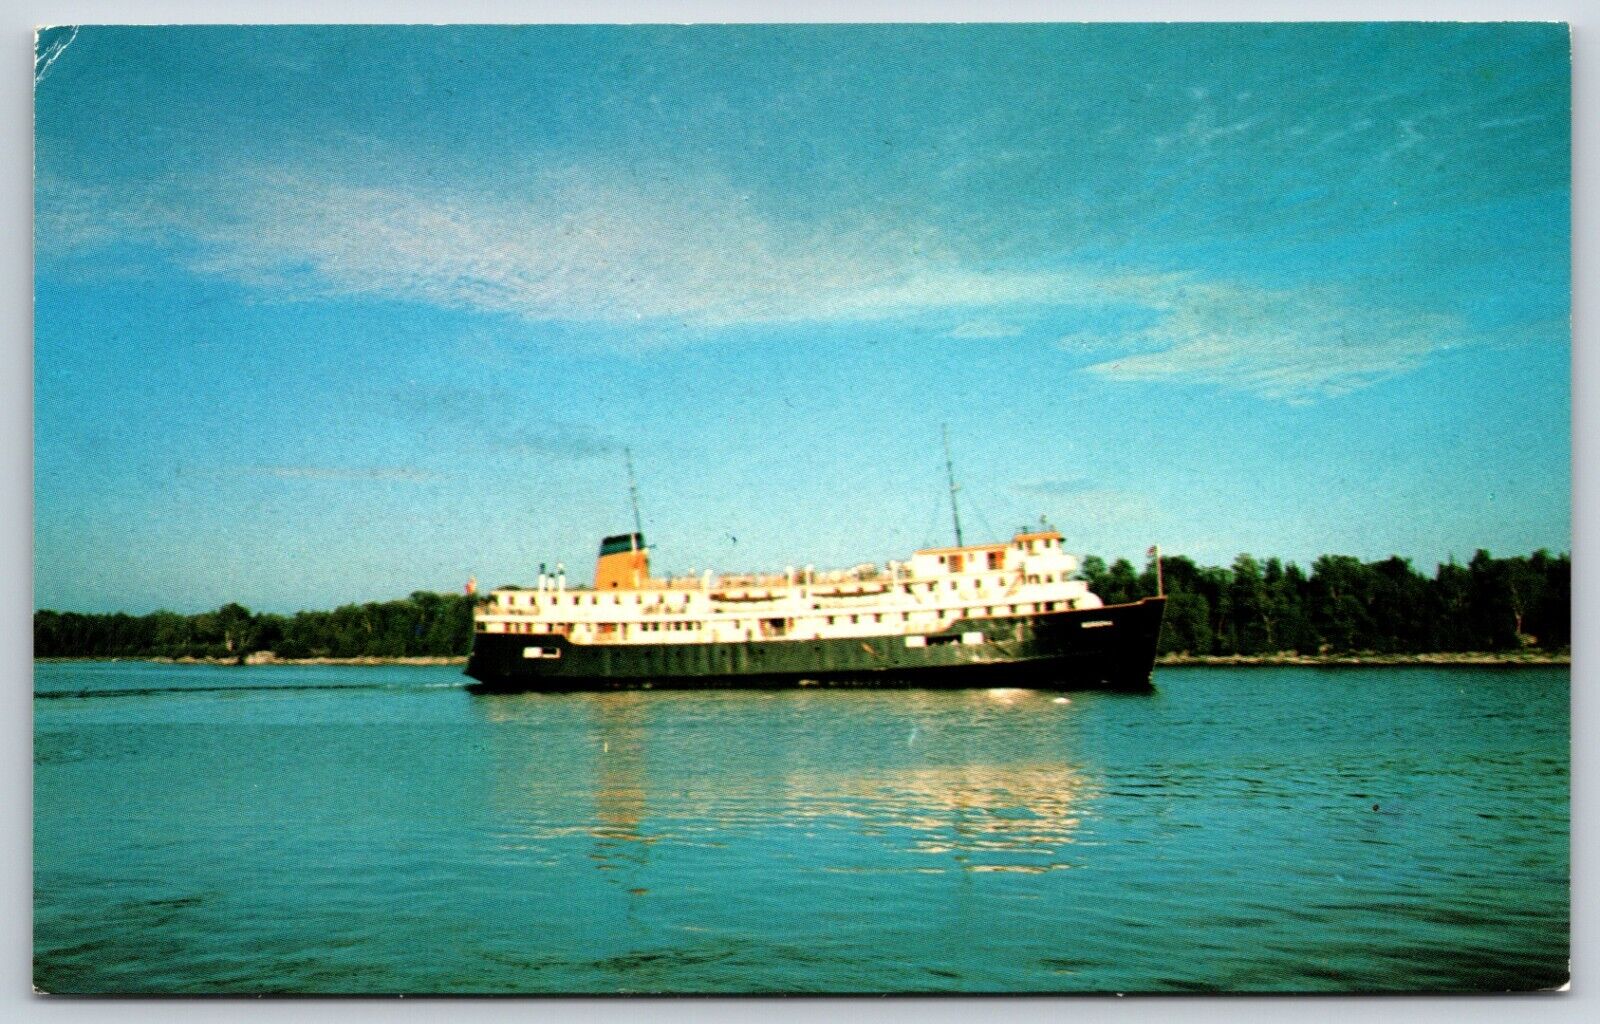 Postcard M.S. Norgoma, Car Ferry, Manitoulin Island, Ontario Canada Posted 1968